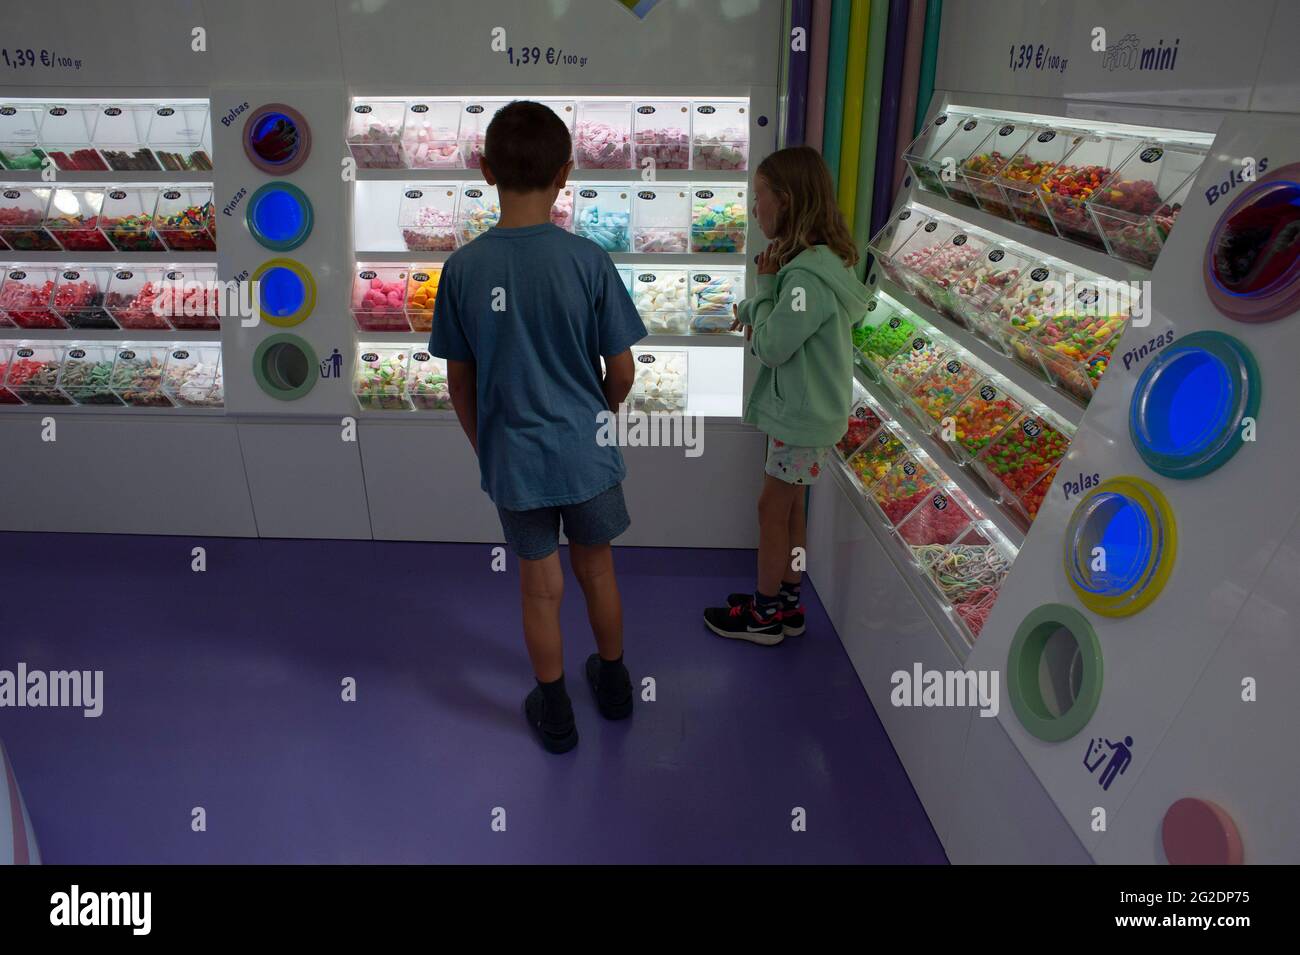 Kids in a sweet shop looking at the colourful display of treats Stock Photo